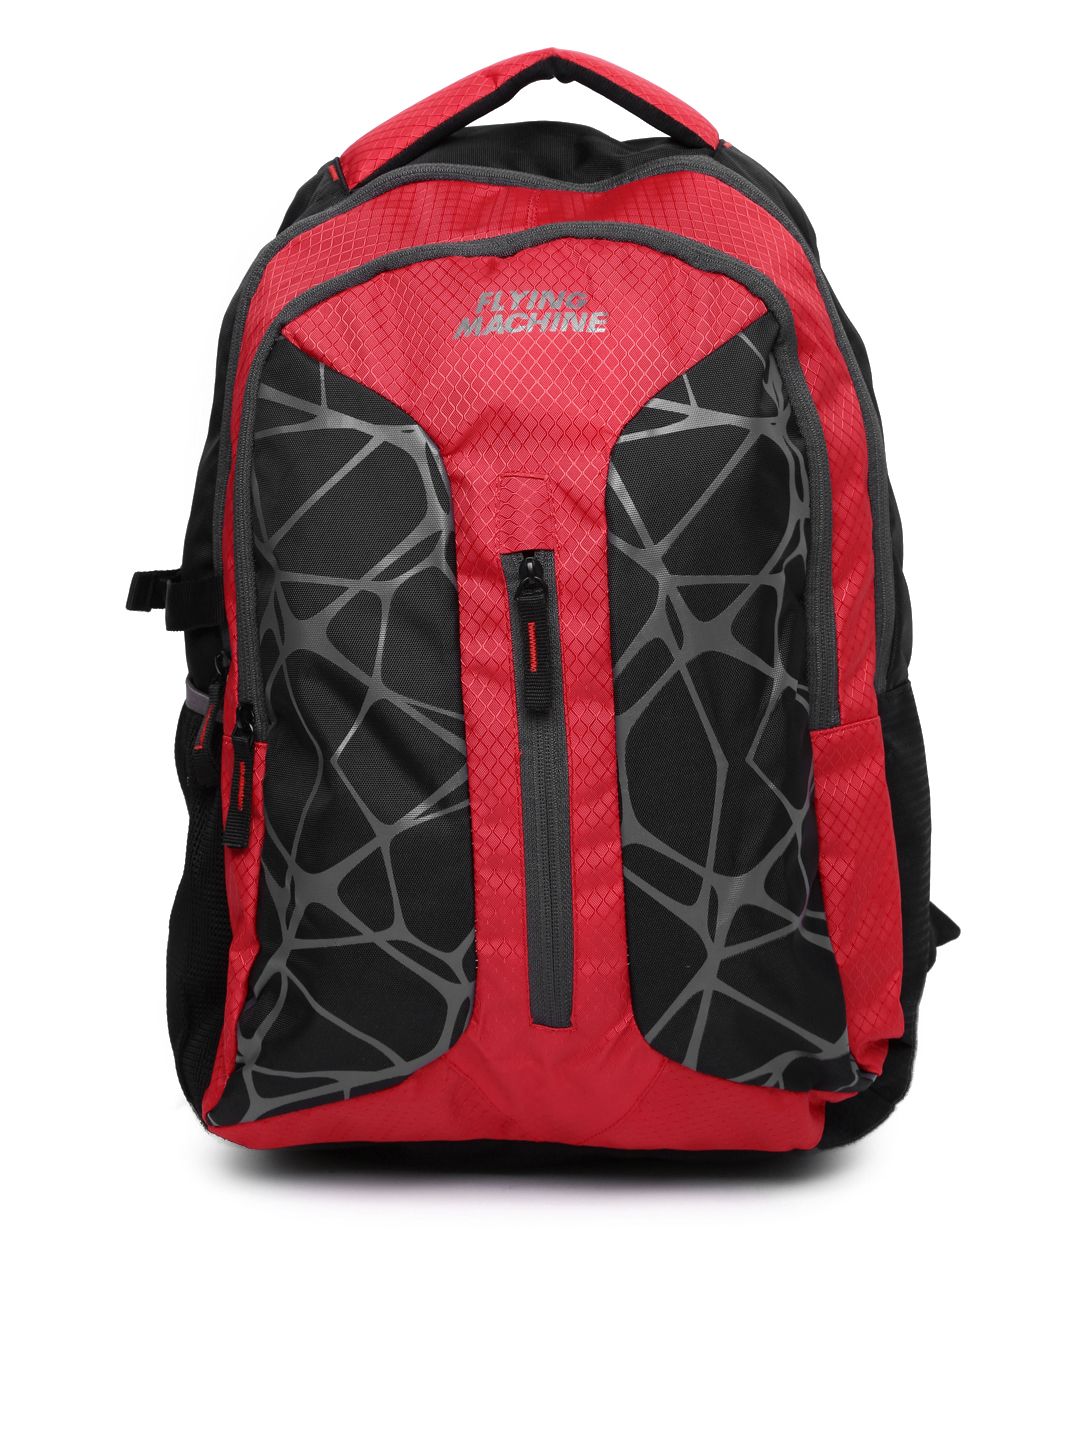 Flying Machine Unisex Black & Red Printed Backpack Price in India